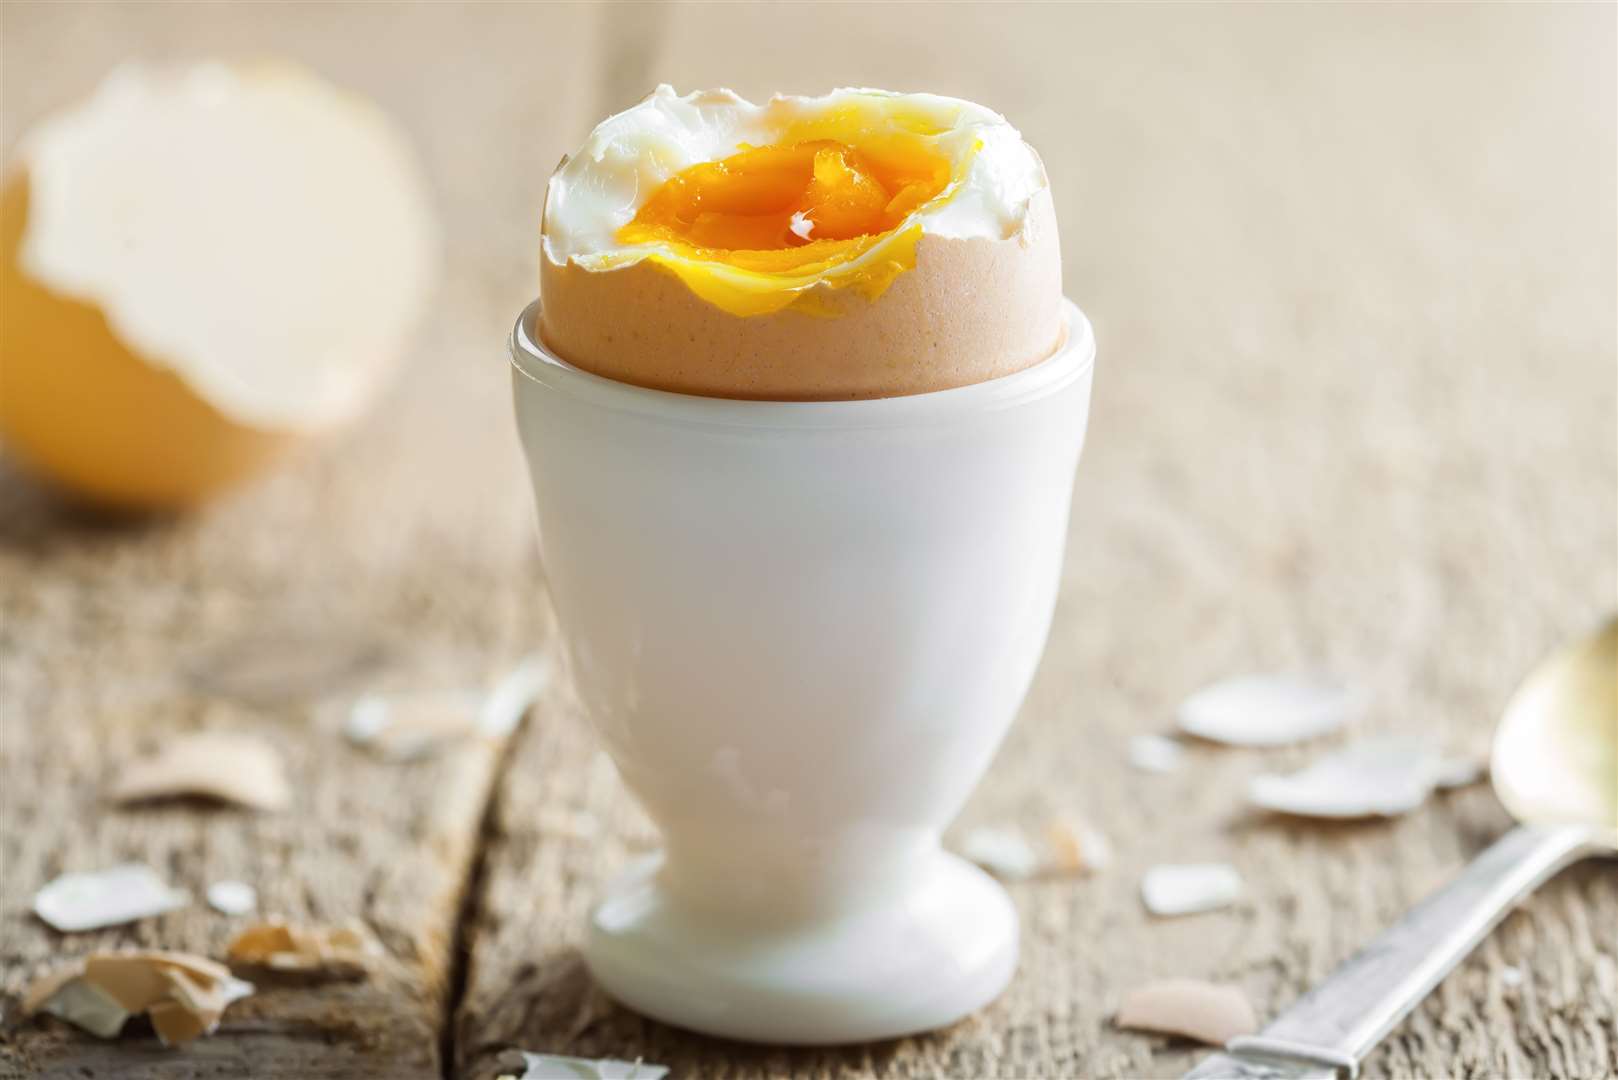 The country is still struggling with a shortage of eggs. Image: iStock.